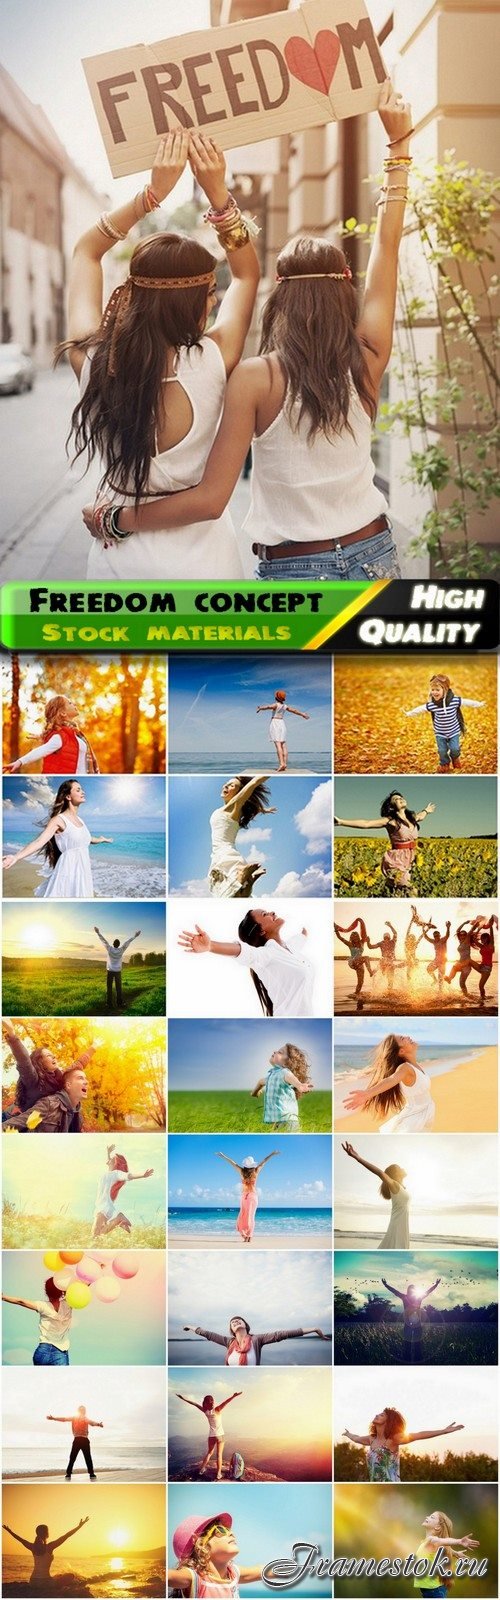 Freedom concept and happy and free people 2 - 25 HQ Jpg